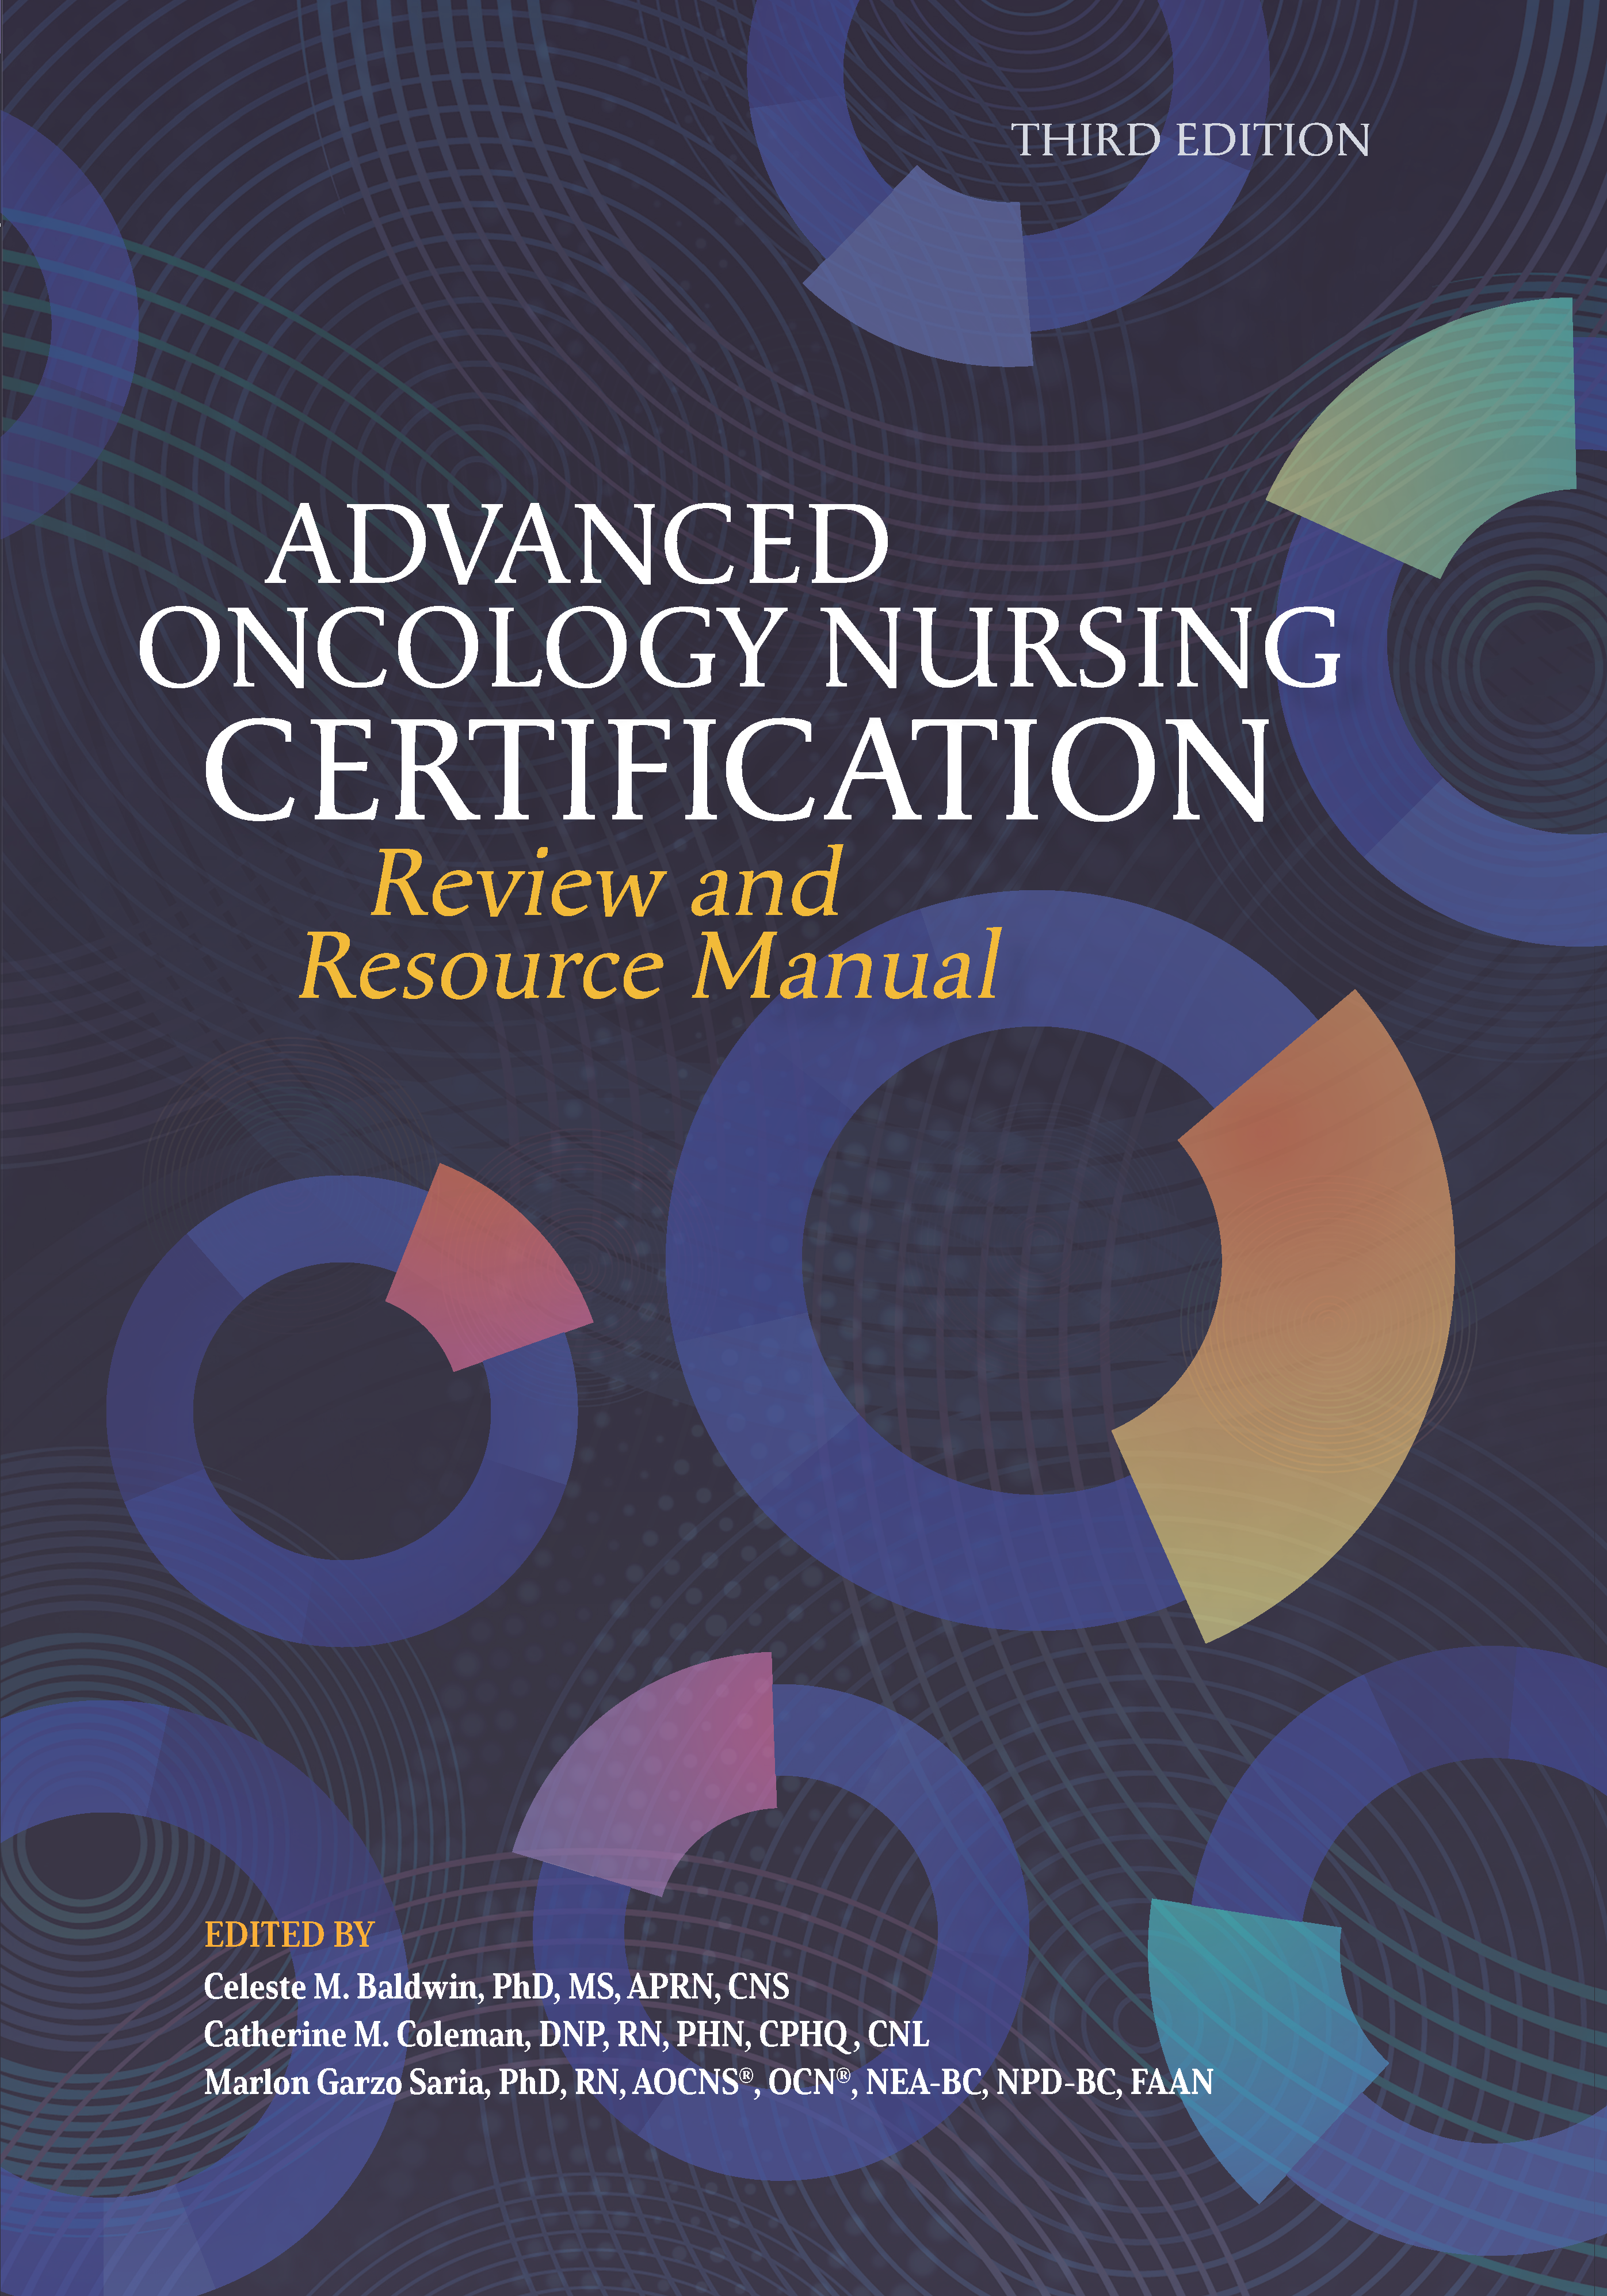 Advanced Oncology Nursing Certification Review and Resource Manual (Third Edition)